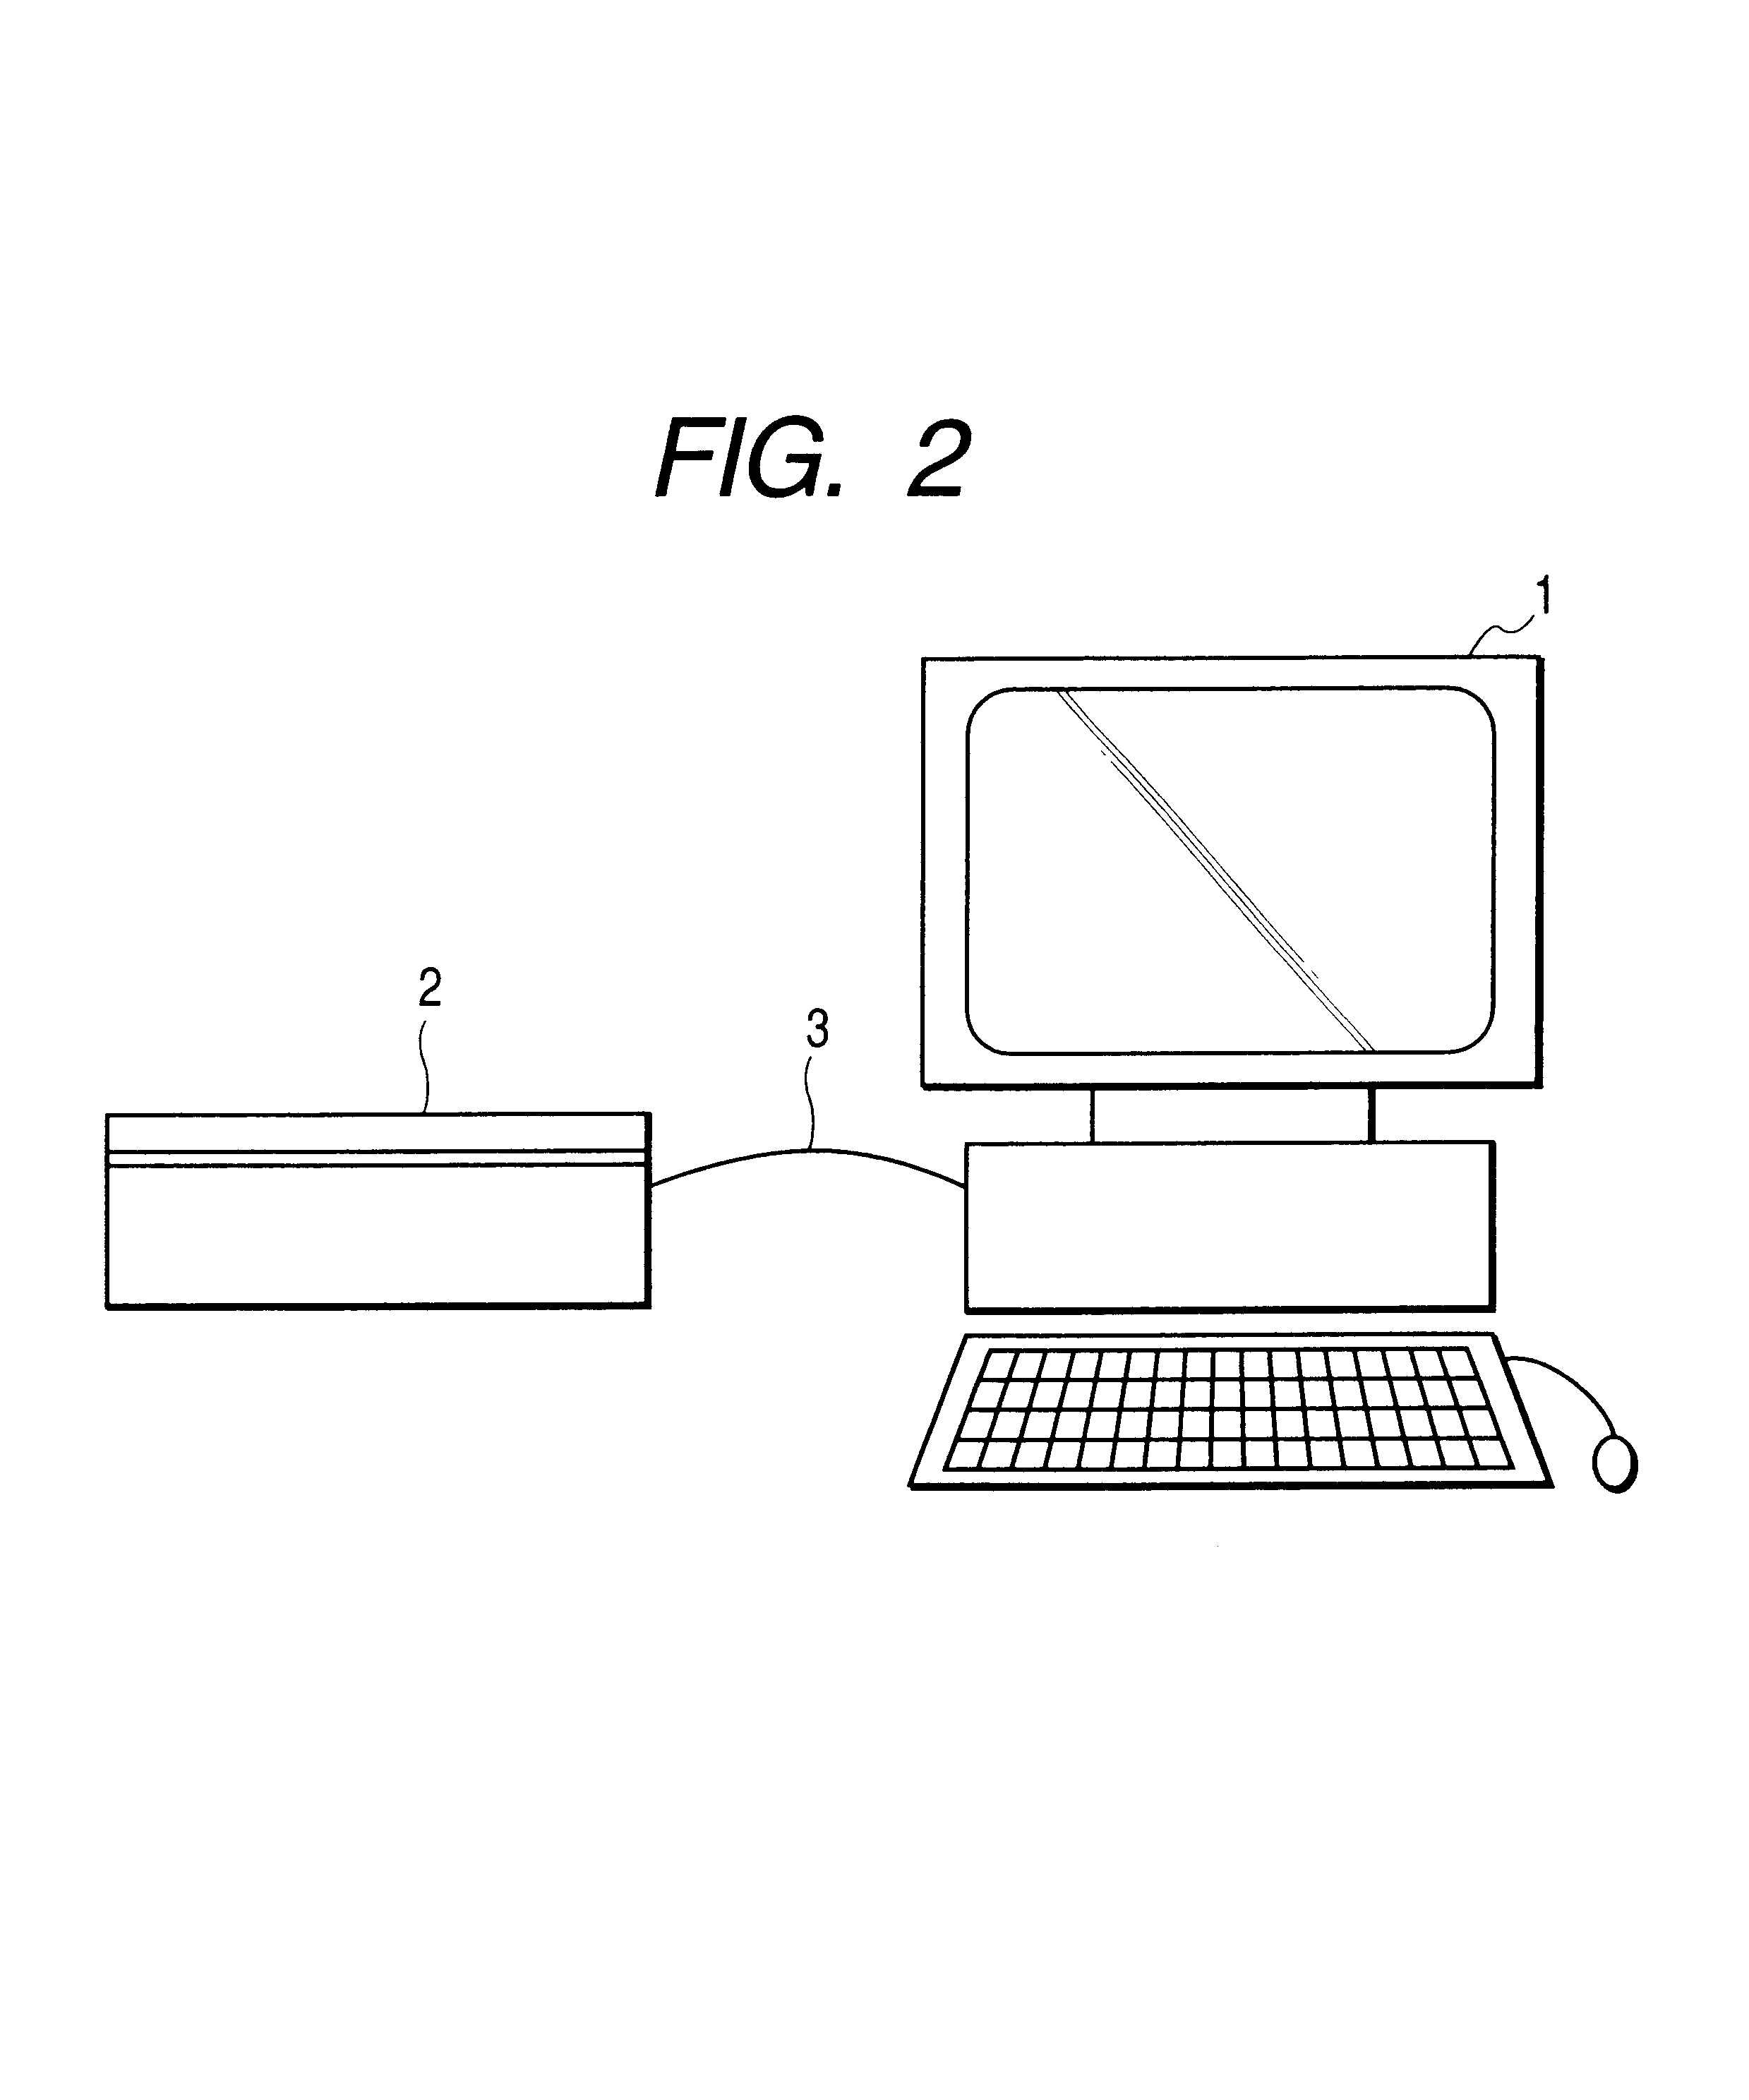 Image processing method, apparatus, and medium storing program for checking for copy-prohibited objects